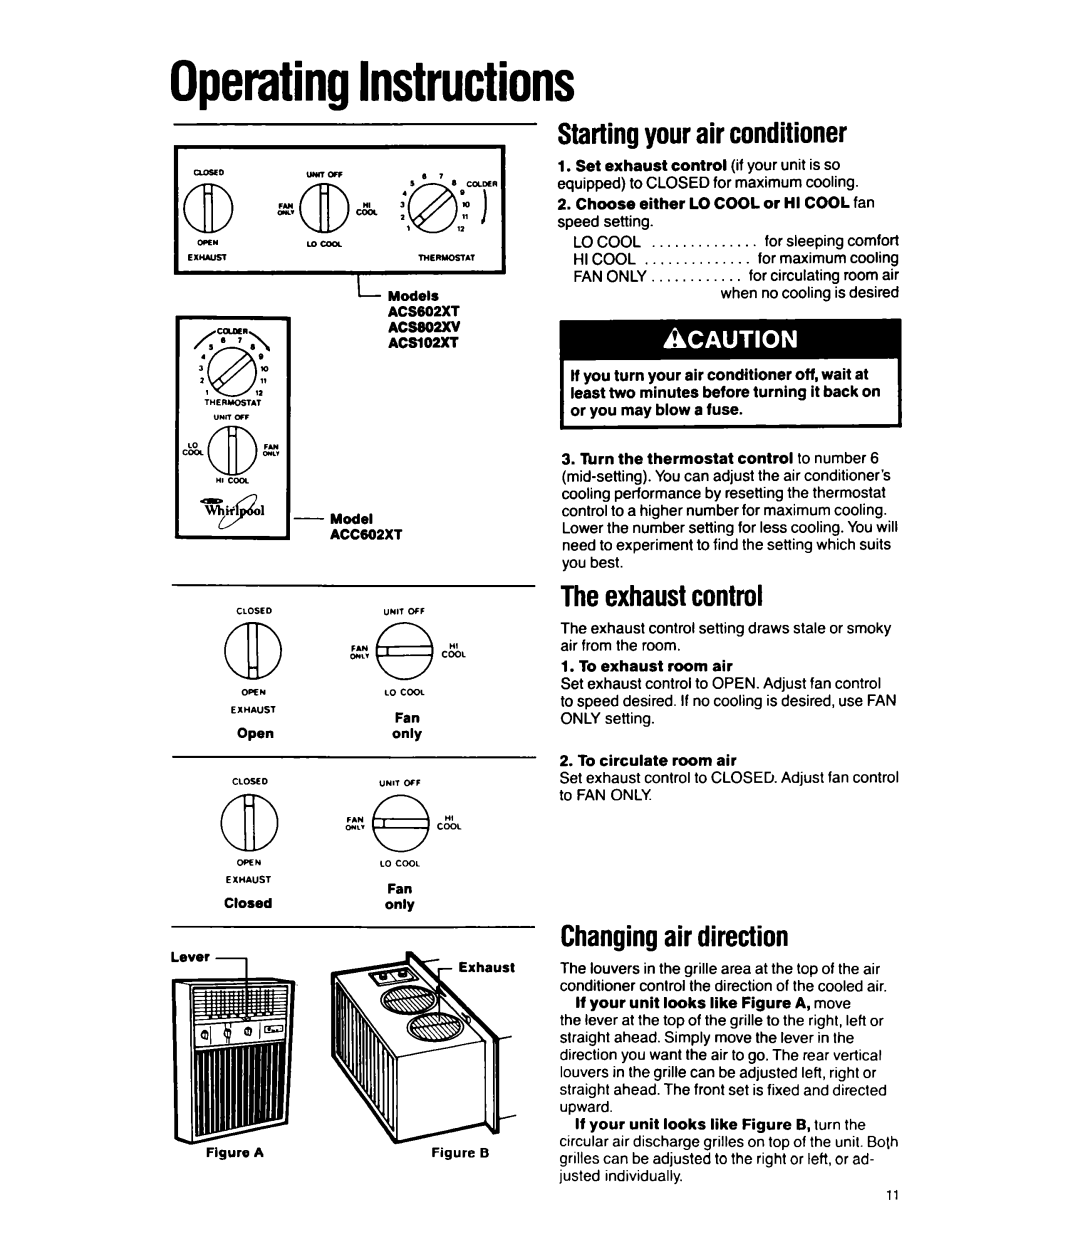 Whirlpool ACC602XT OperatingInstructions, Startingyourair conditioner, Theexhaustcontrol, Changingair direction, LModels 